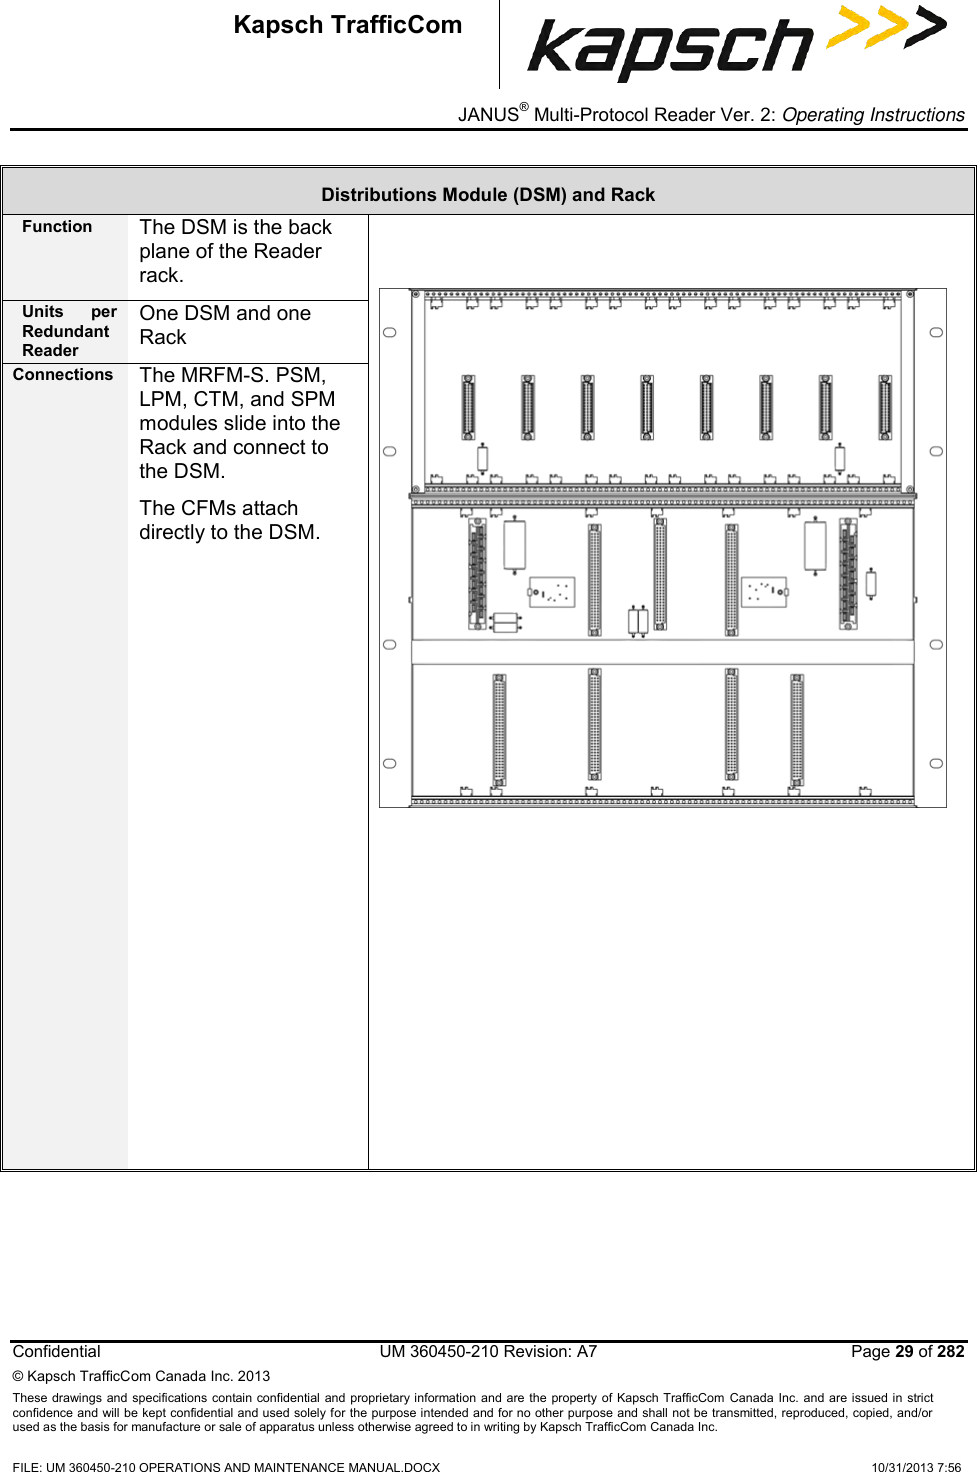 _ JANUS® Multi-Protocol Reader Ver. 2: Operating Instructions  Confidential  UM 360450-210 Revision: A7   Page 29 of 282 © Kapsch TrafficCom Canada Inc. 2013 These  drawings and specifications contain confidential  and  proprietary information and are  the  property of Kapsch TrafficCom  Canada Inc.  and are issued in strict confidence and will be kept confidential and used solely for the purpose intended and for no other purpose and shall not be transmitted, reproduced, copied, and/or used as the basis for manufacture or sale of apparatus unless otherwise agreed to in writing by Kapsch TrafficCom Canada Inc.  FILE: UM 360450-210 OPERATIONS AND MAINTENANCE MANUAL.DOCX    10/31/2013 7:56  Kapsch TrafficCom Distributions Module (DSM) and Rack Function The DSM is the back plane of the Reader rack.     Units  per Redundant Reader One DSM and one Rack Connections The MRFM-S. PSM, LPM, CTM, and SPM modules slide into the Rack and connect to the DSM. The CFMs attach directly to the DSM.   